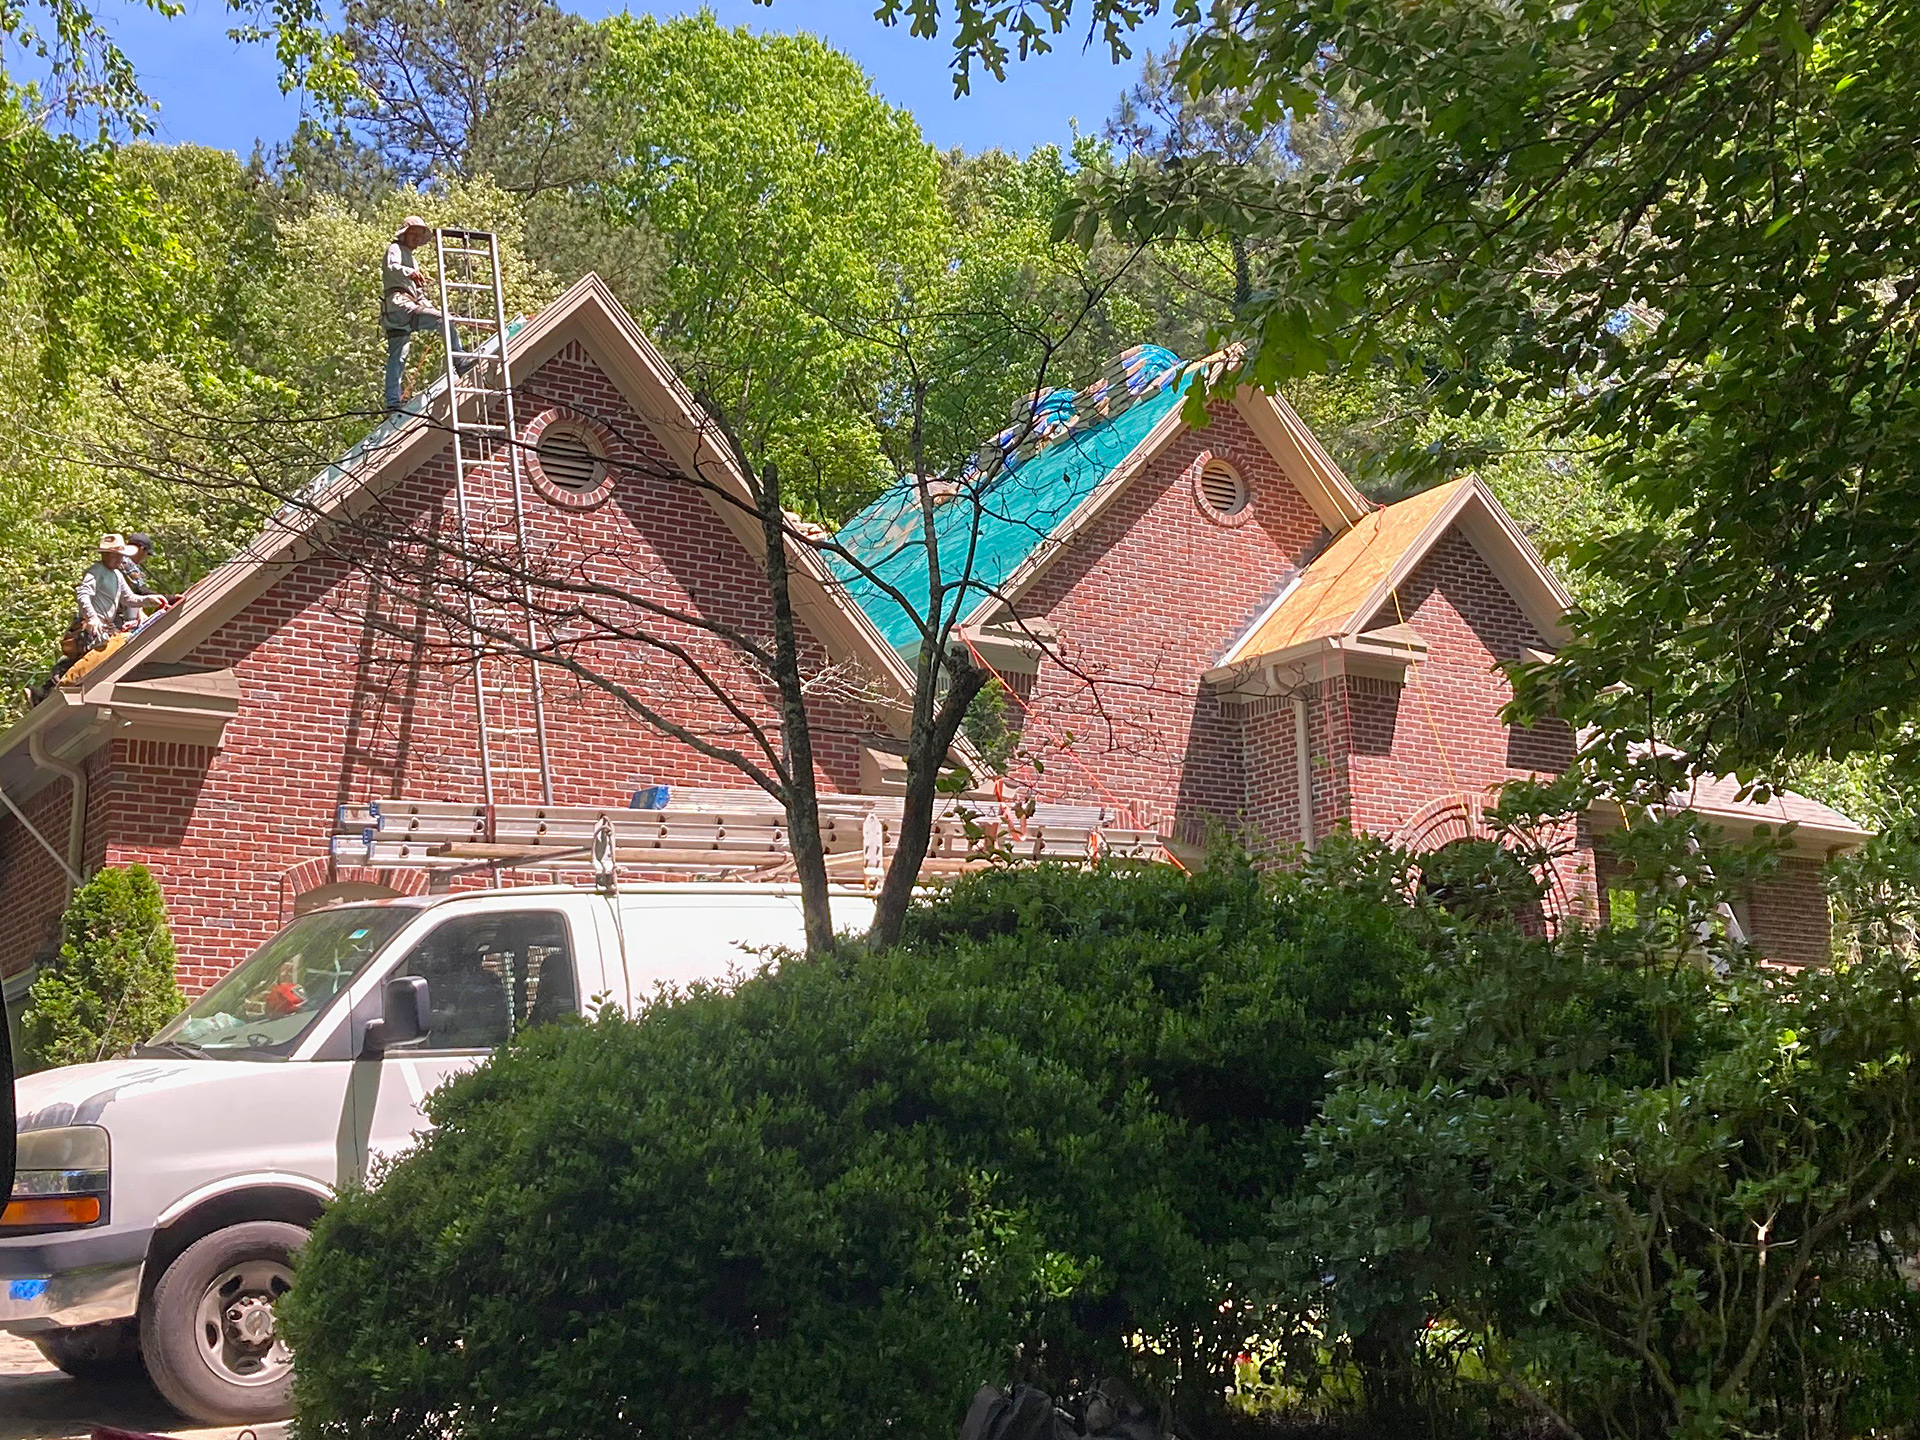 Roof Replacement